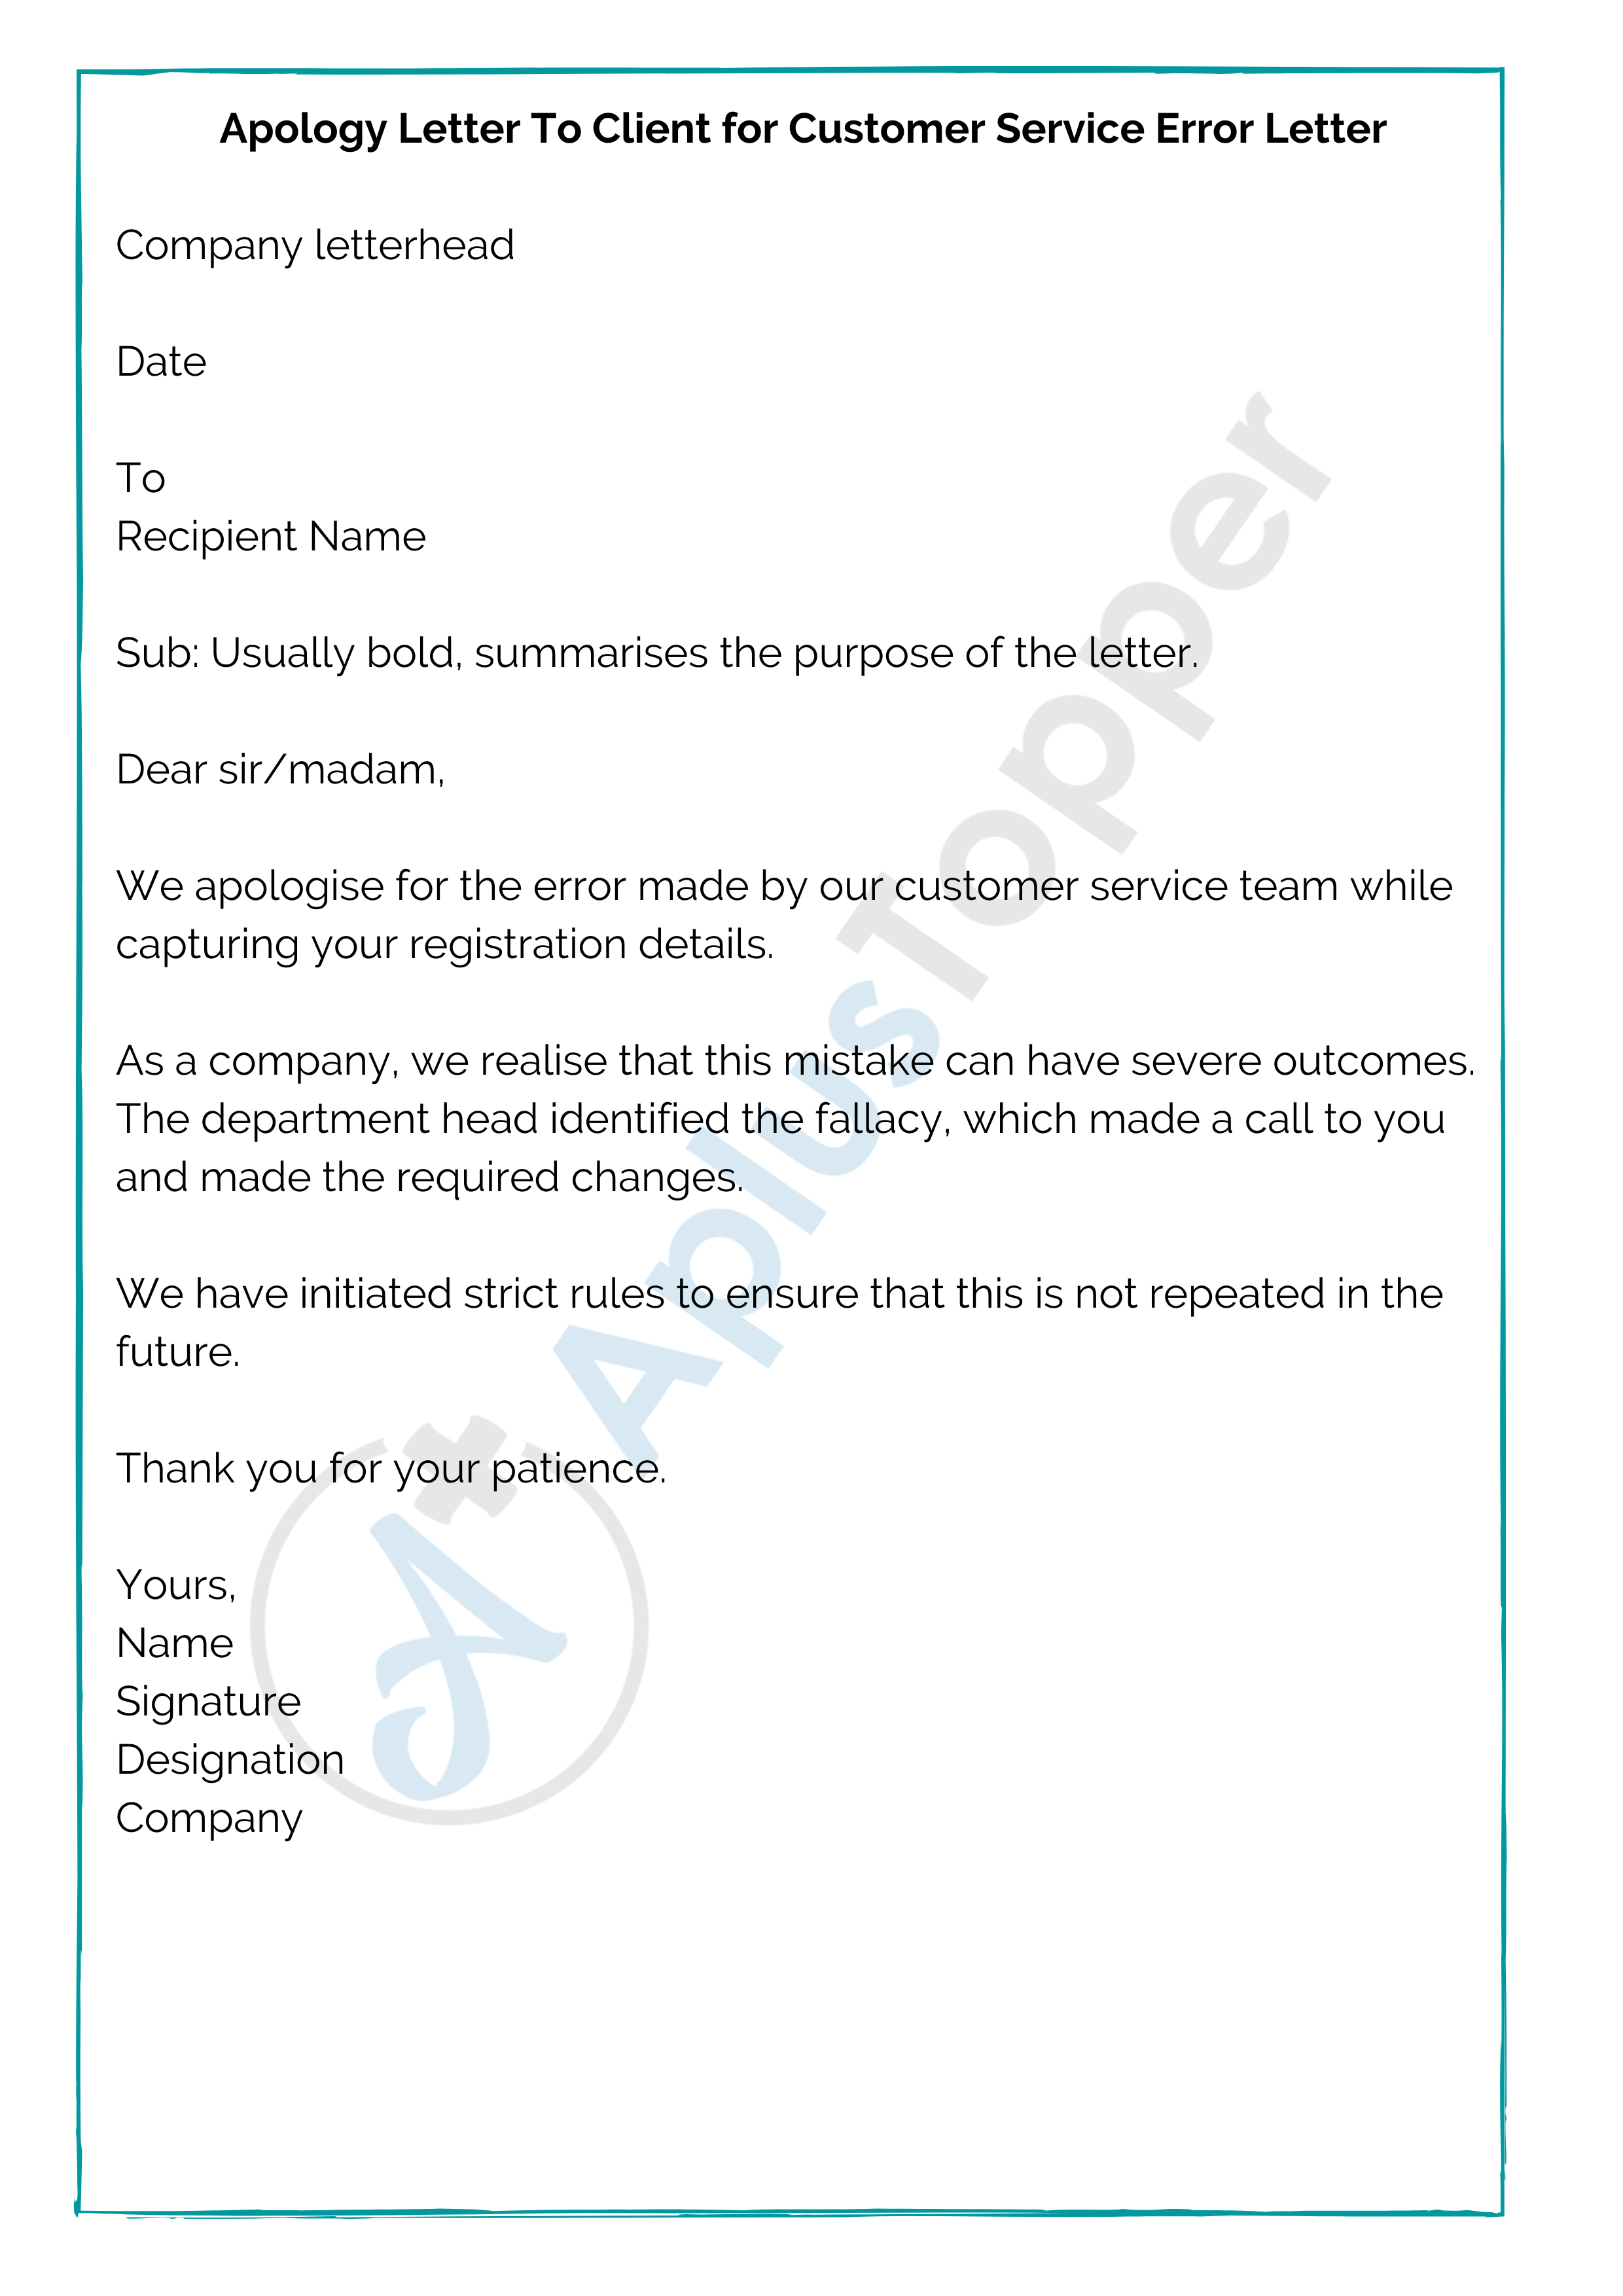 25+ Sample Letter of Error  Format, Samples and Examples of Error